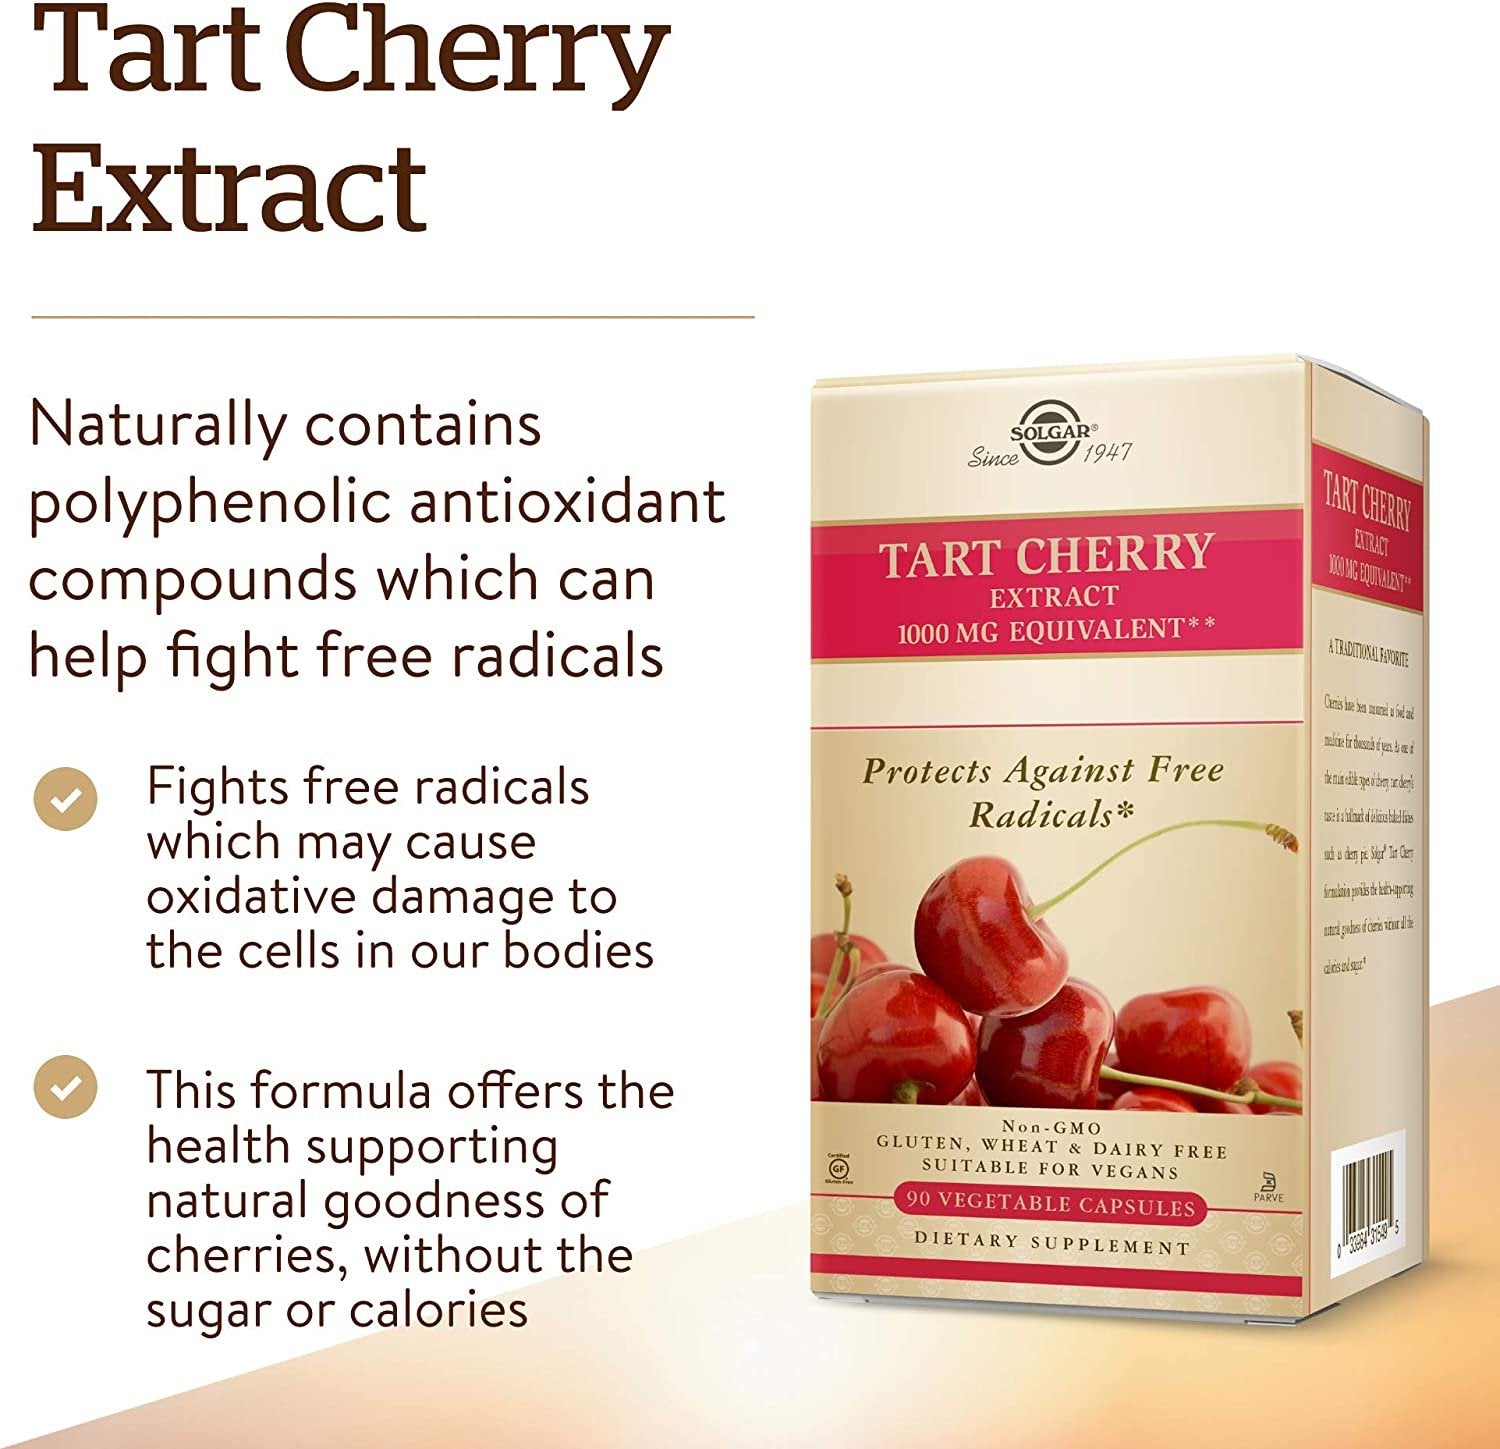 Solgar Tart Cherry 1000 mg, 90 Vegetable Capsules - Antioxidant with Quercetin, Chlorogenic Acid & Anthocyanins Compounds - Non GMO, Vegan, Gluten Free, Dairy Free - 90 Servings